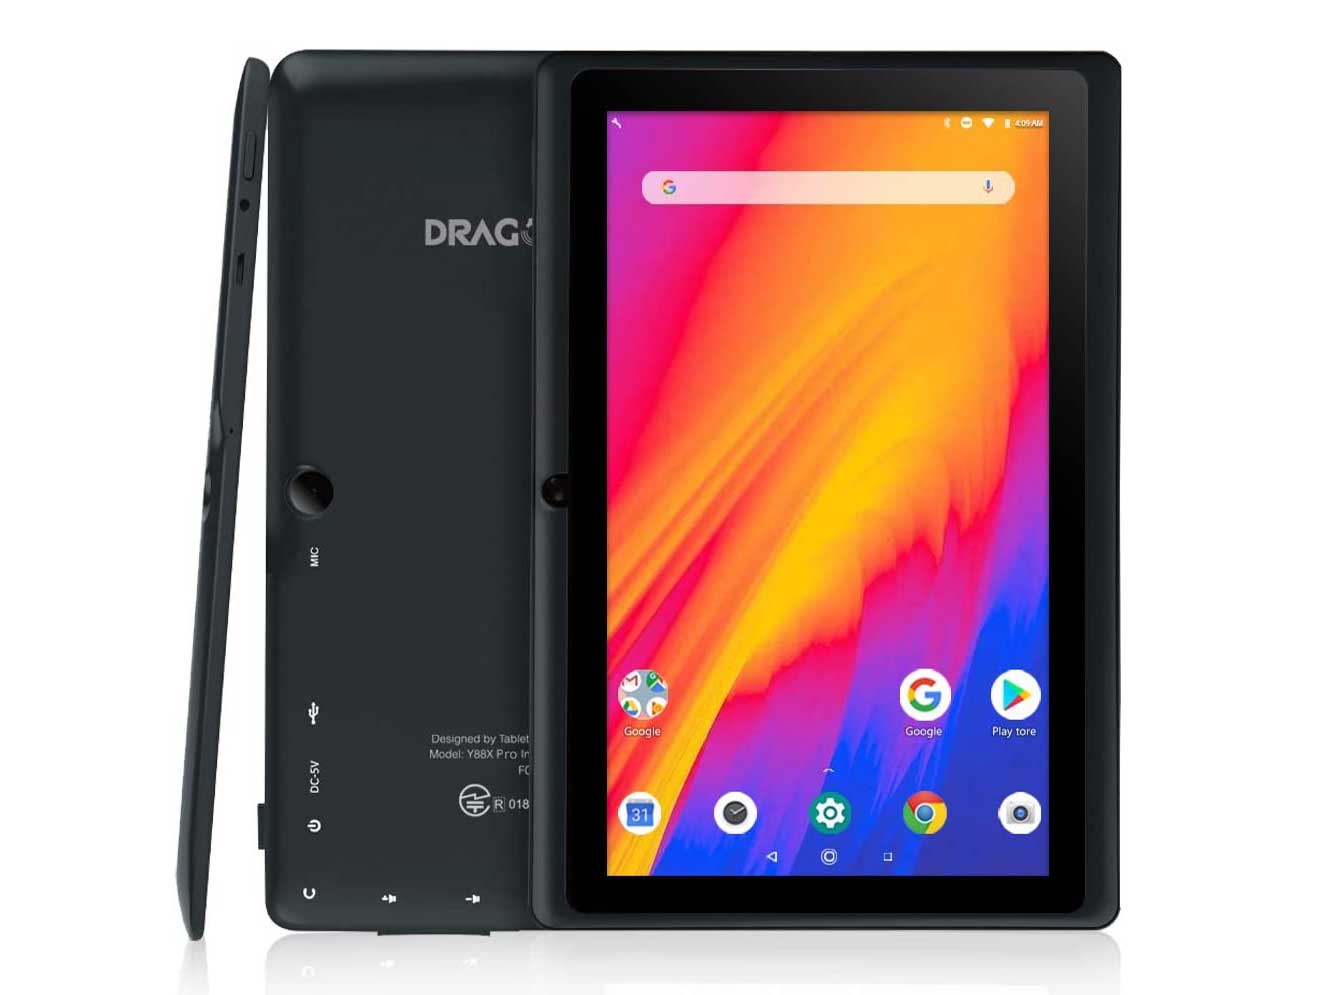 Dragon Touch 7 inch Tablet, Android 9.0 Pie, Quad-Core Processor, 2GB RAM 16GB Storage, 7 inch IPS HD Display, Dual Camera, Wi-Fi Only, Black